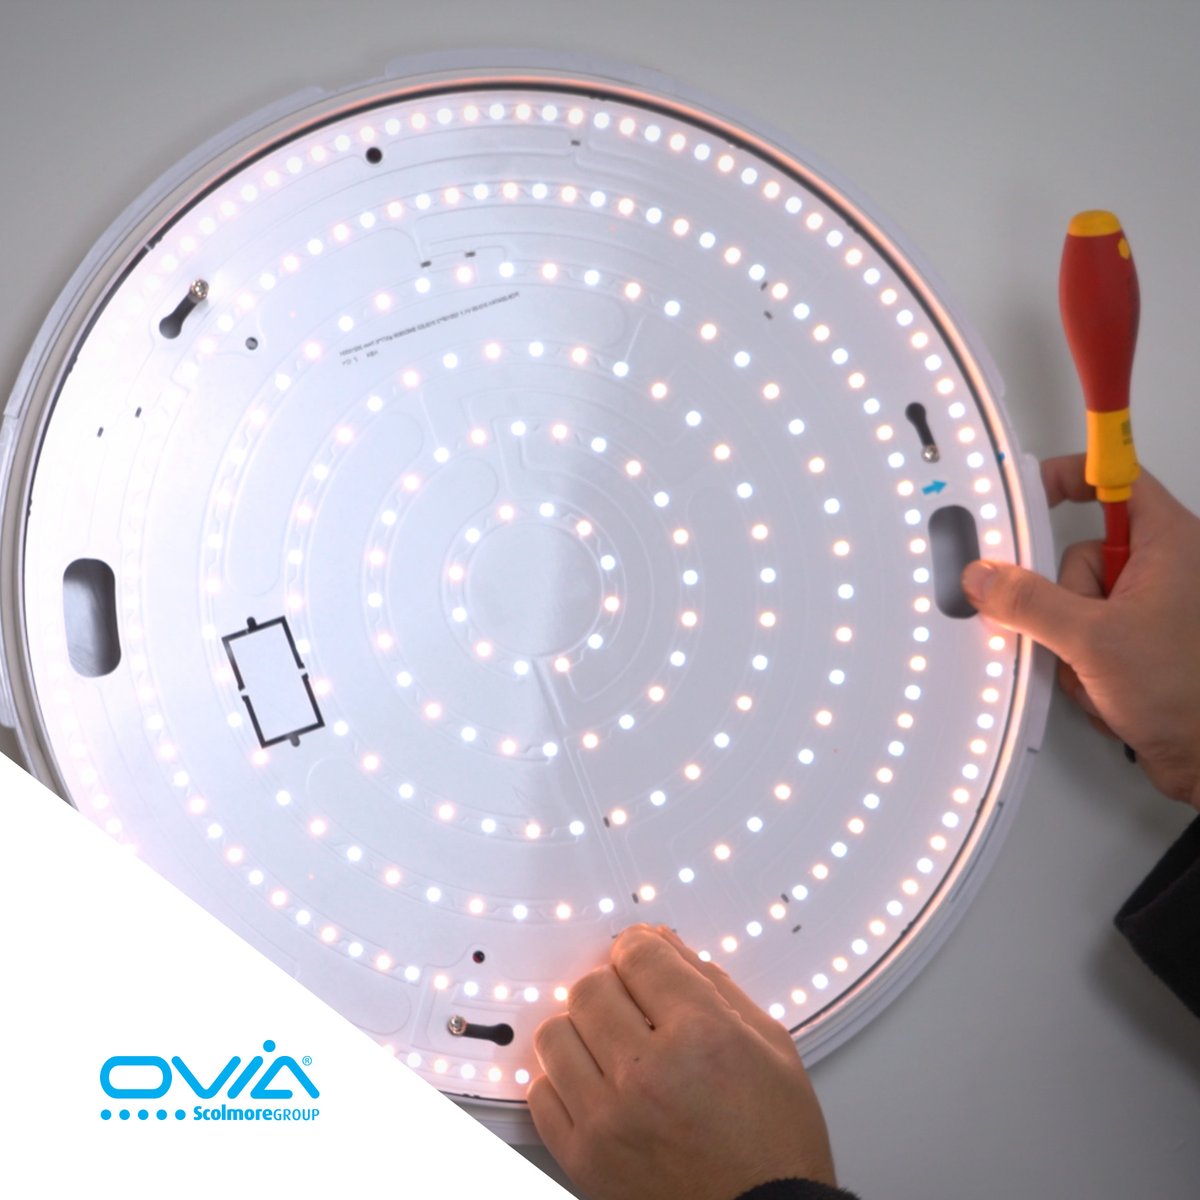 In this week's SGTV, Jake guides us through installing the @OviaLighting Evo Deco XL bulkhead 🪛 Find out more about the features, like the piano key connectors, and how we designed the bulkhead to be easy for the installer to fit 📺 youtu.be/SqYDRV3GTME #OviaLighting #SGTV